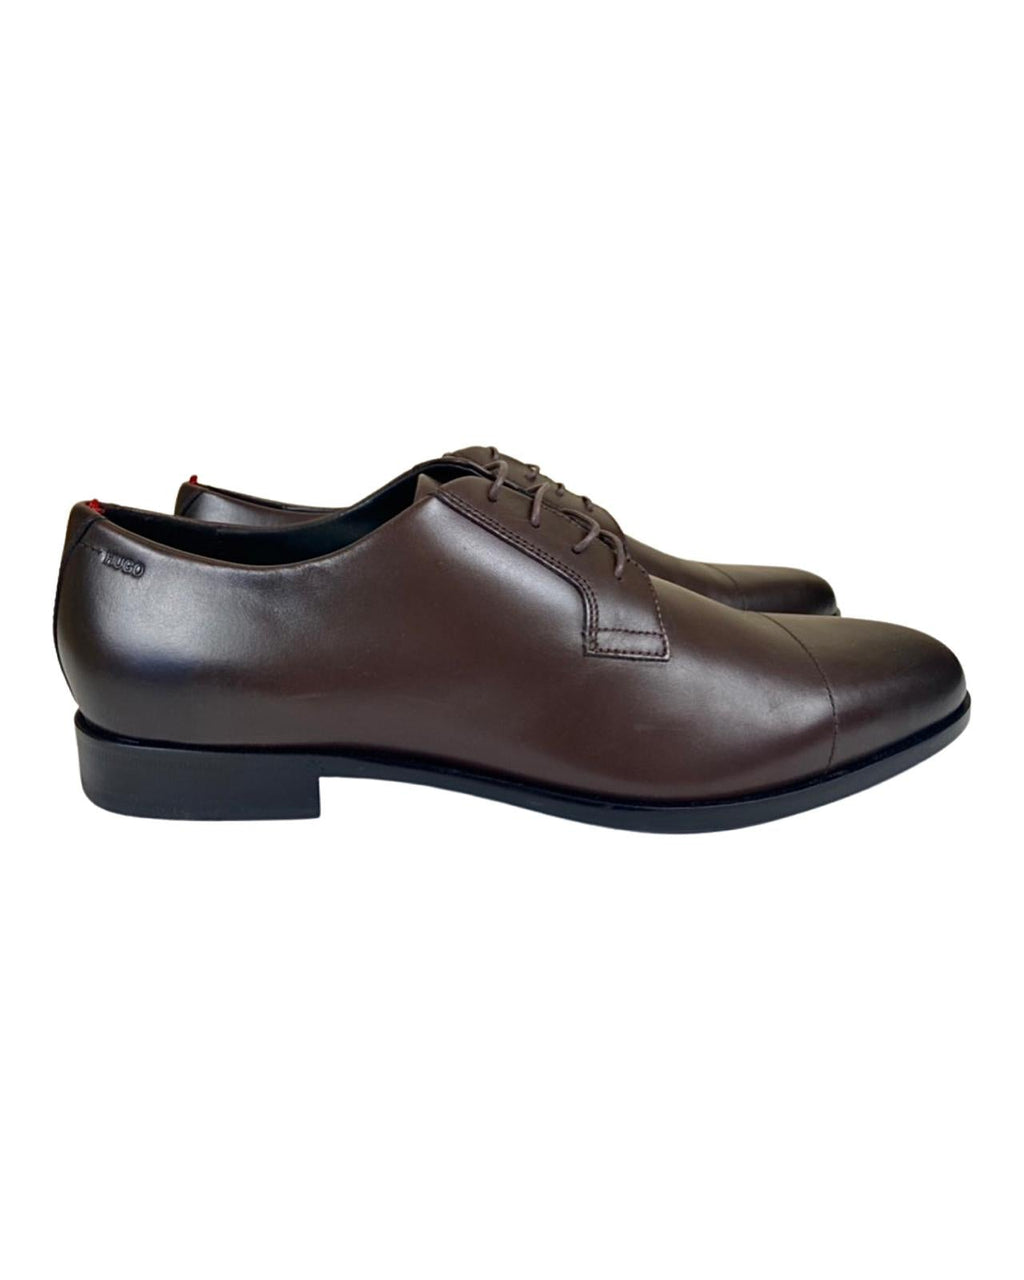 Hugo Boss Vero Cuoio Brown Leather Formal Shoes UK 10-The Freperie